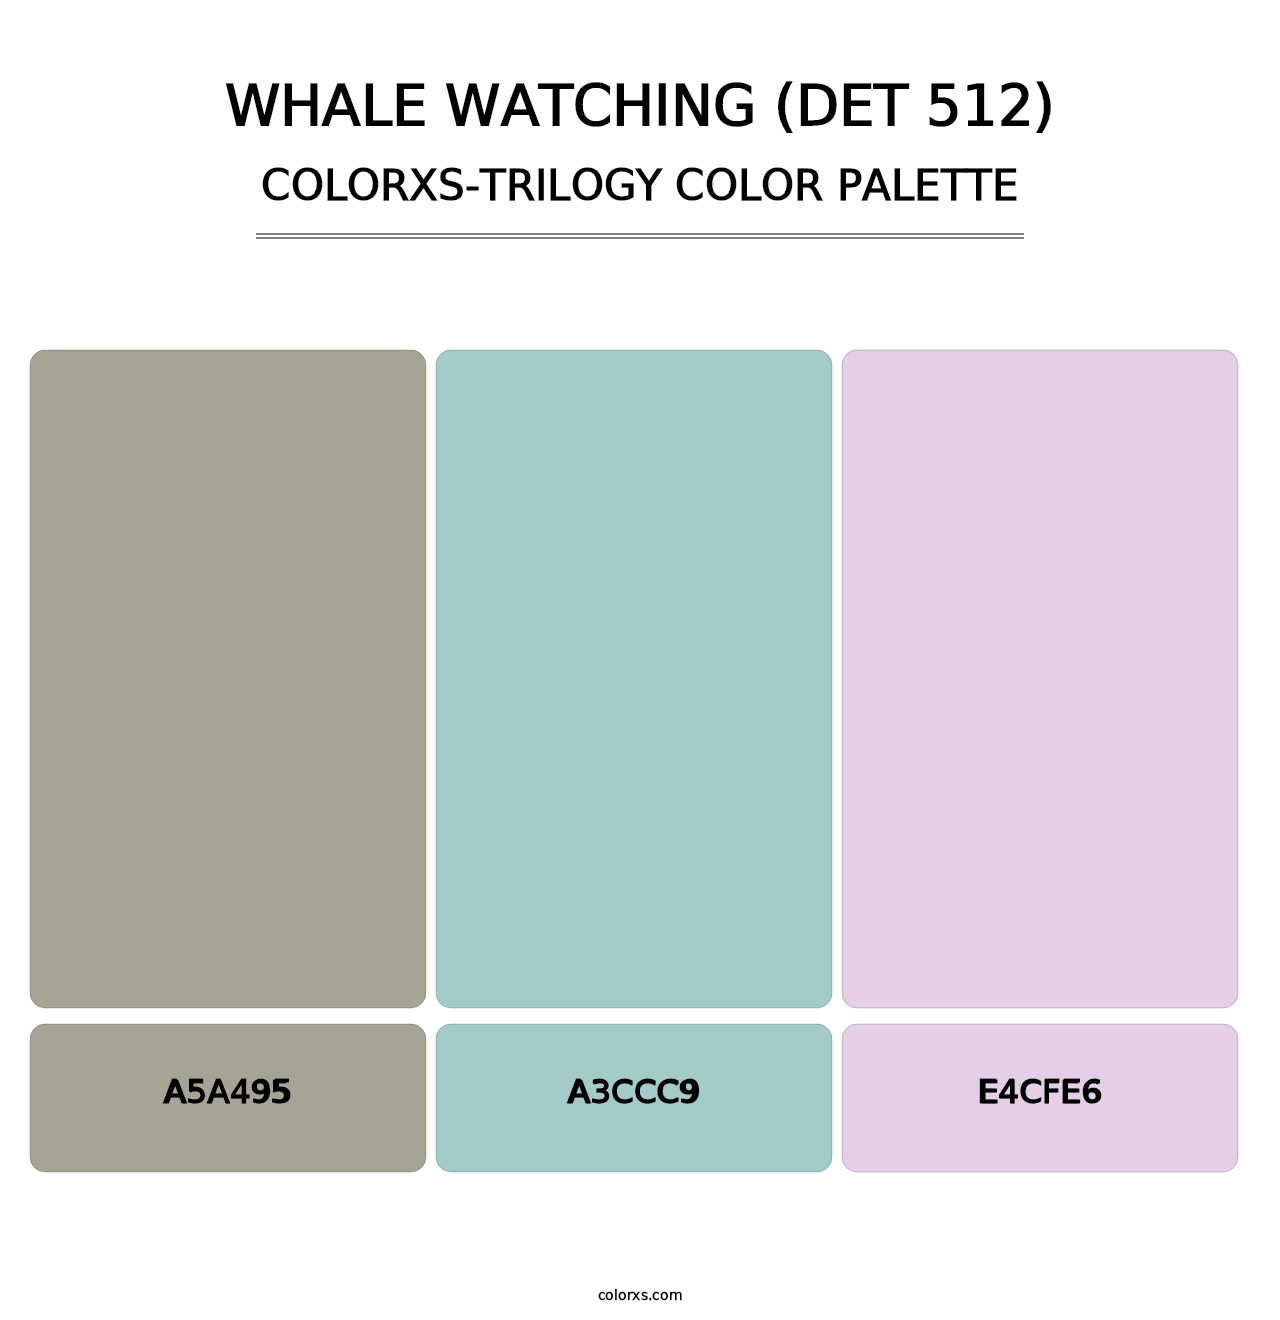 Whale Watching (DET 512) - Colorxs Trilogy Palette